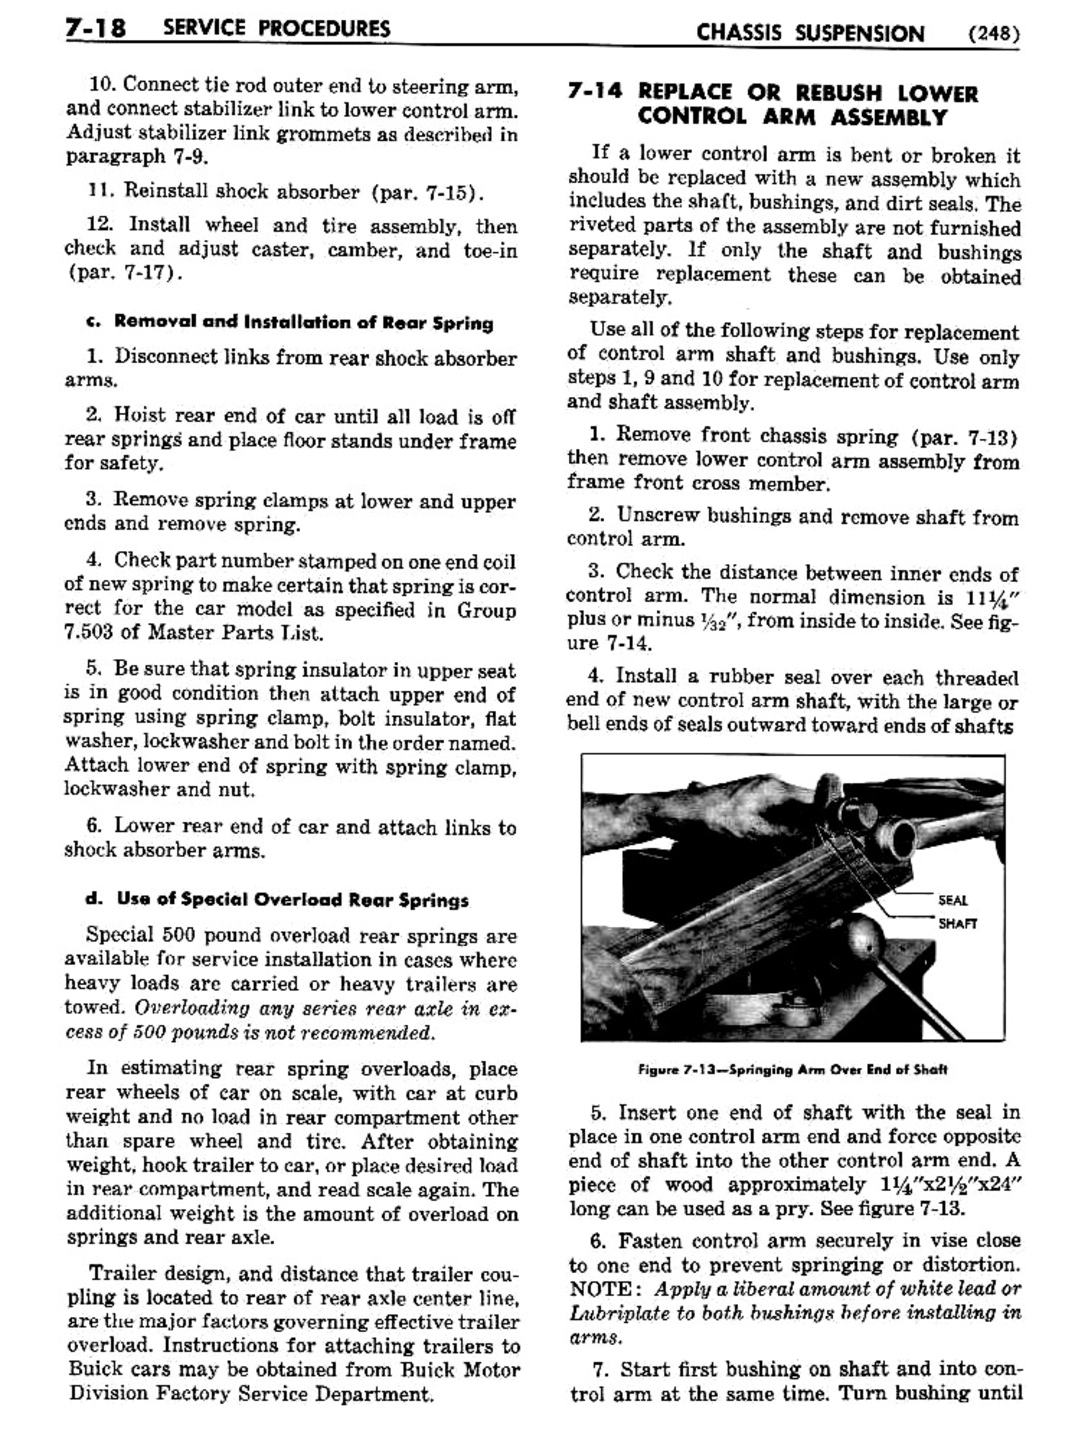 n_08 1954 Buick Shop Manual - Chassis Suspension-018-018.jpg